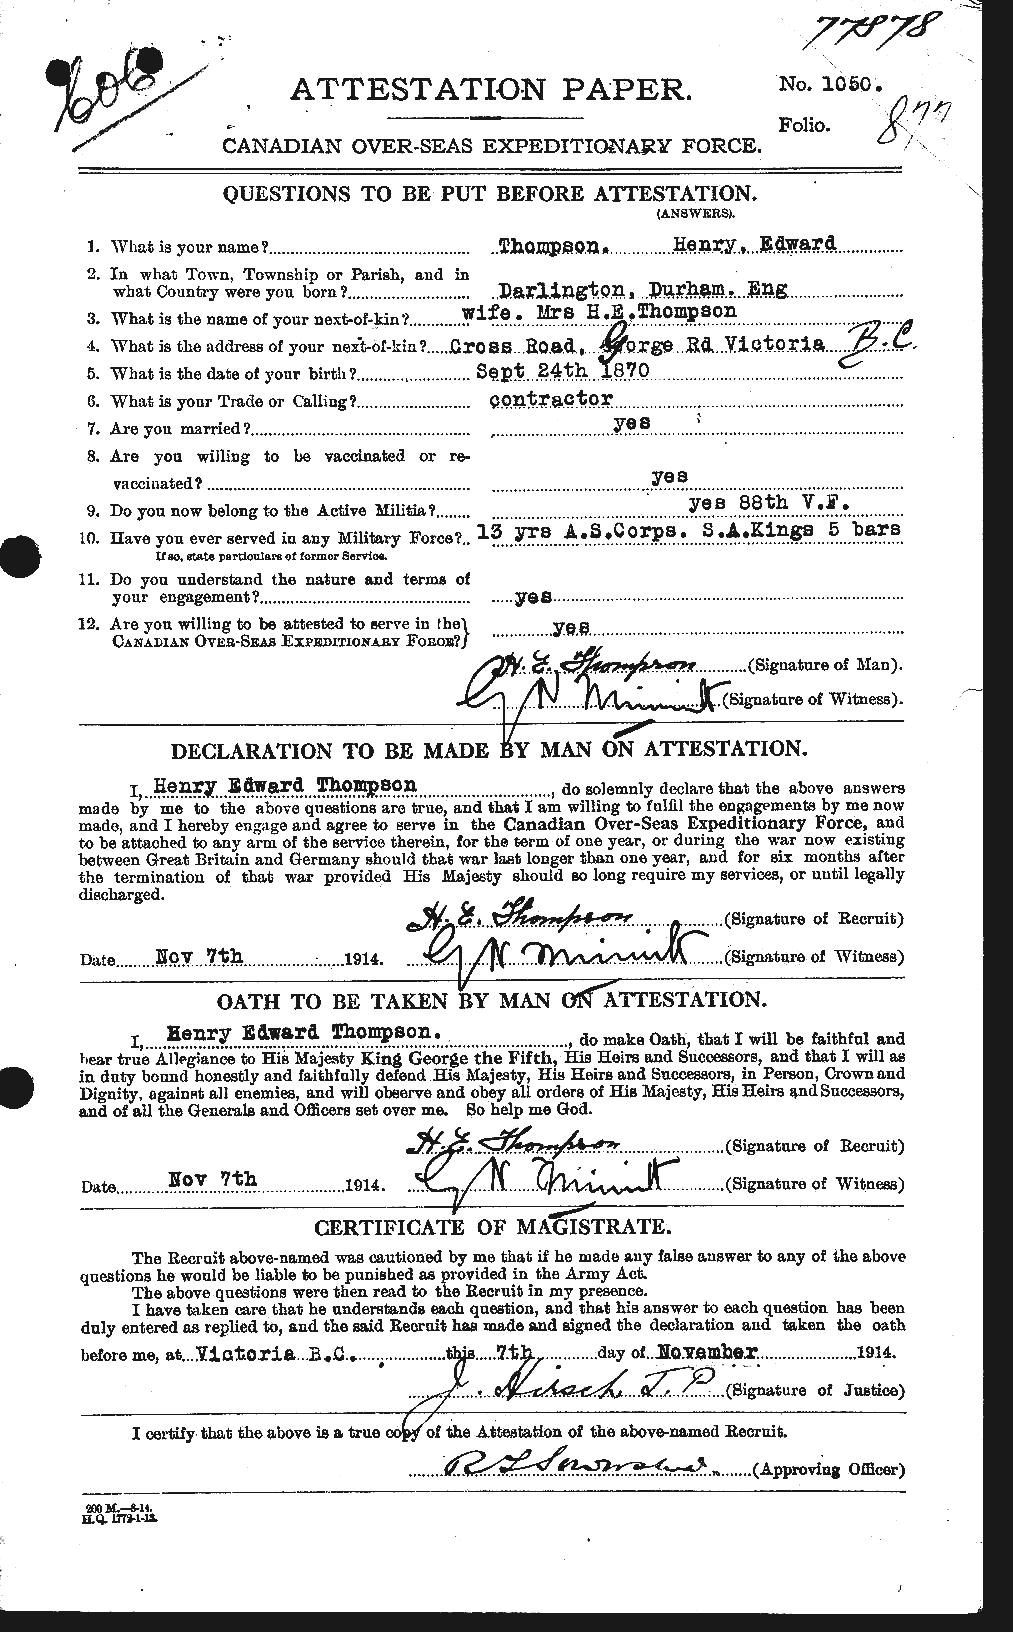 Personnel Records of the First World War - CEF 633915a